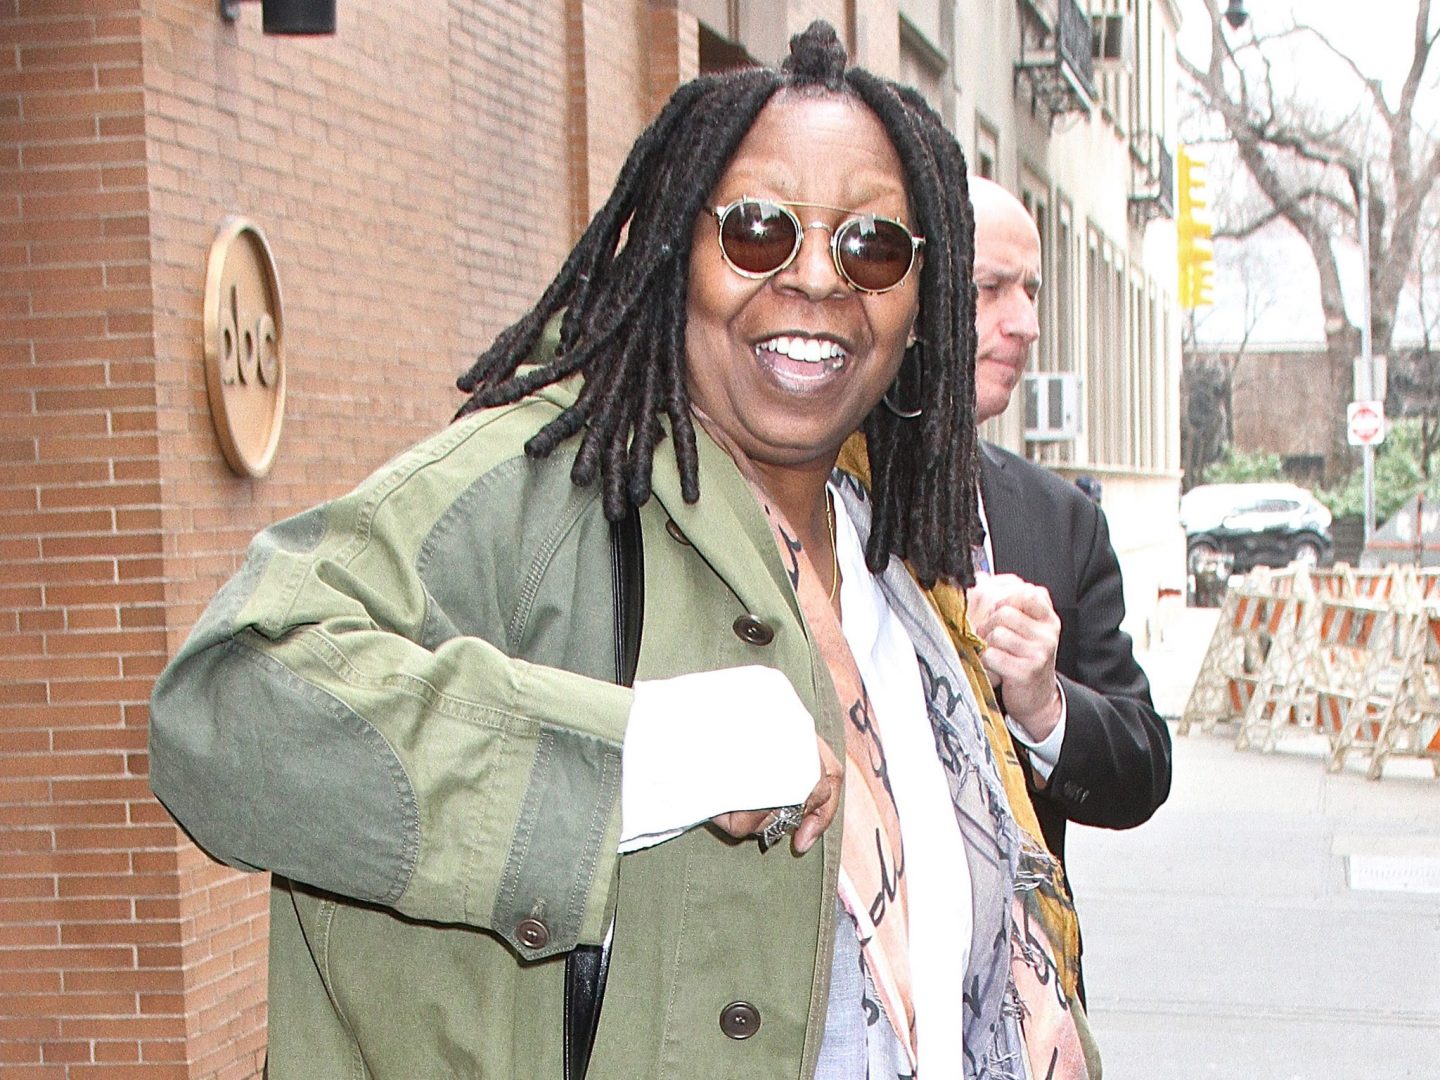 Whoopi Goldberg returns to 'The View' after illness